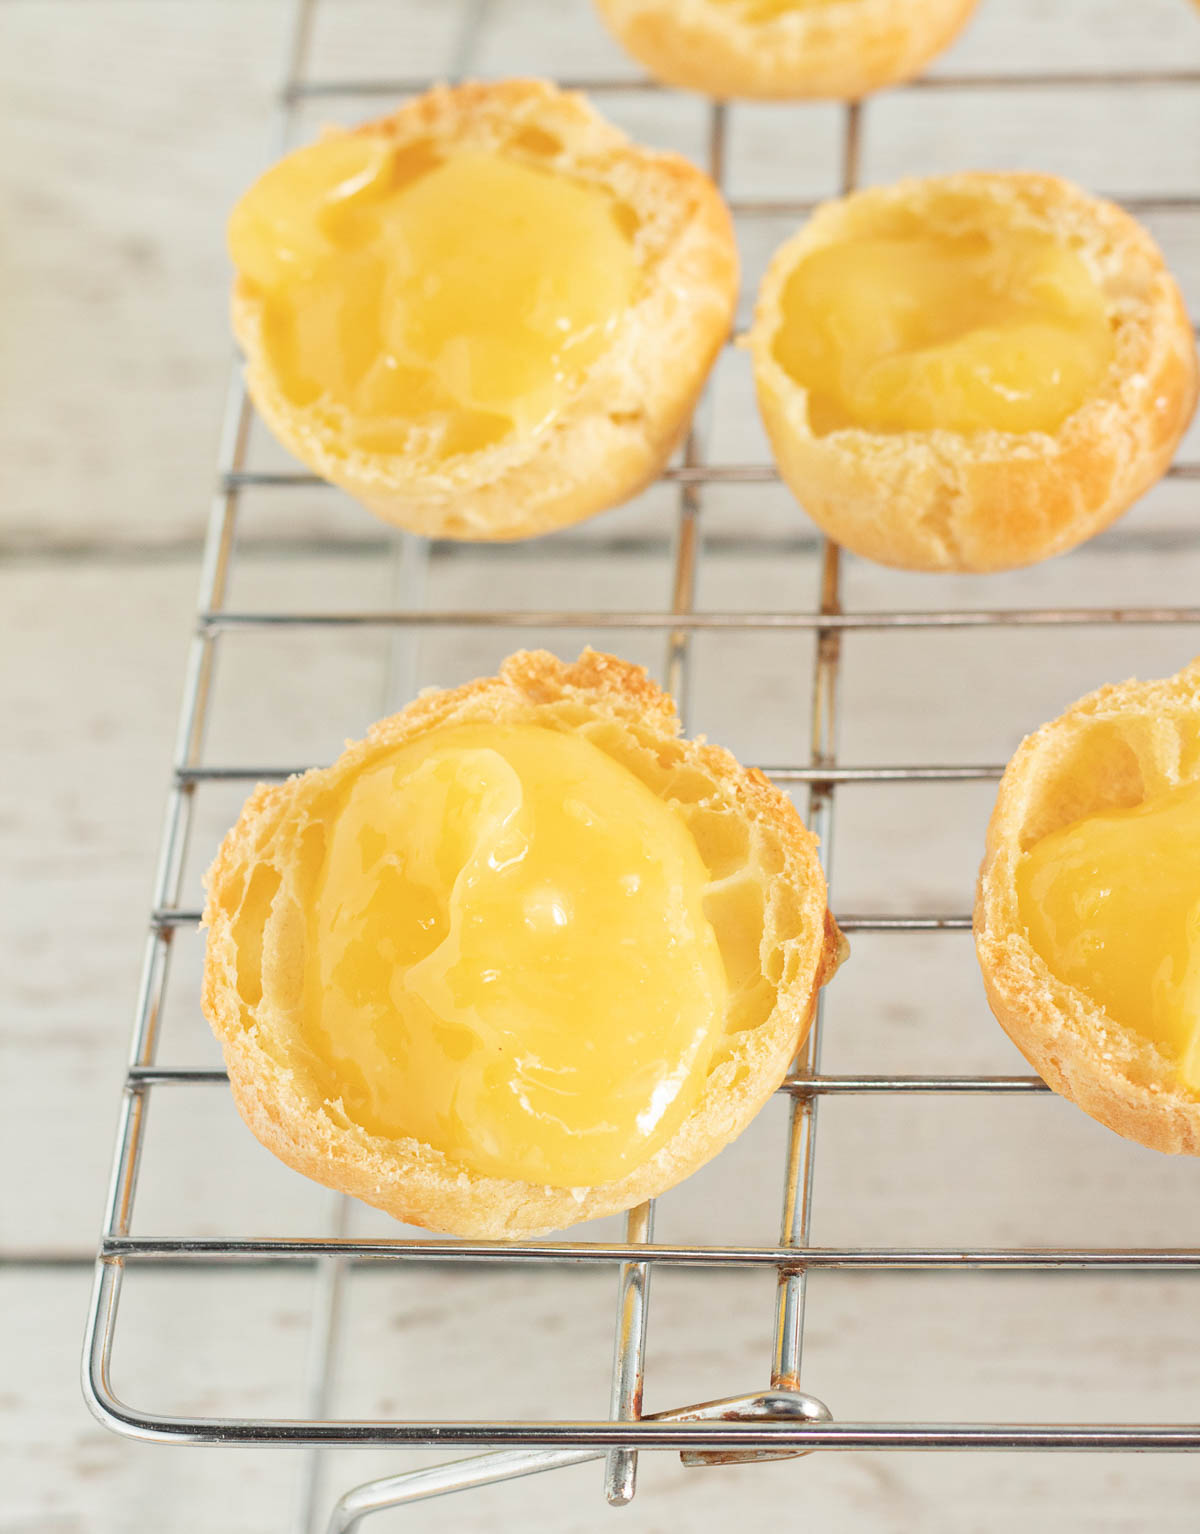 Cream puffs cut in half and filled with lemon curd.